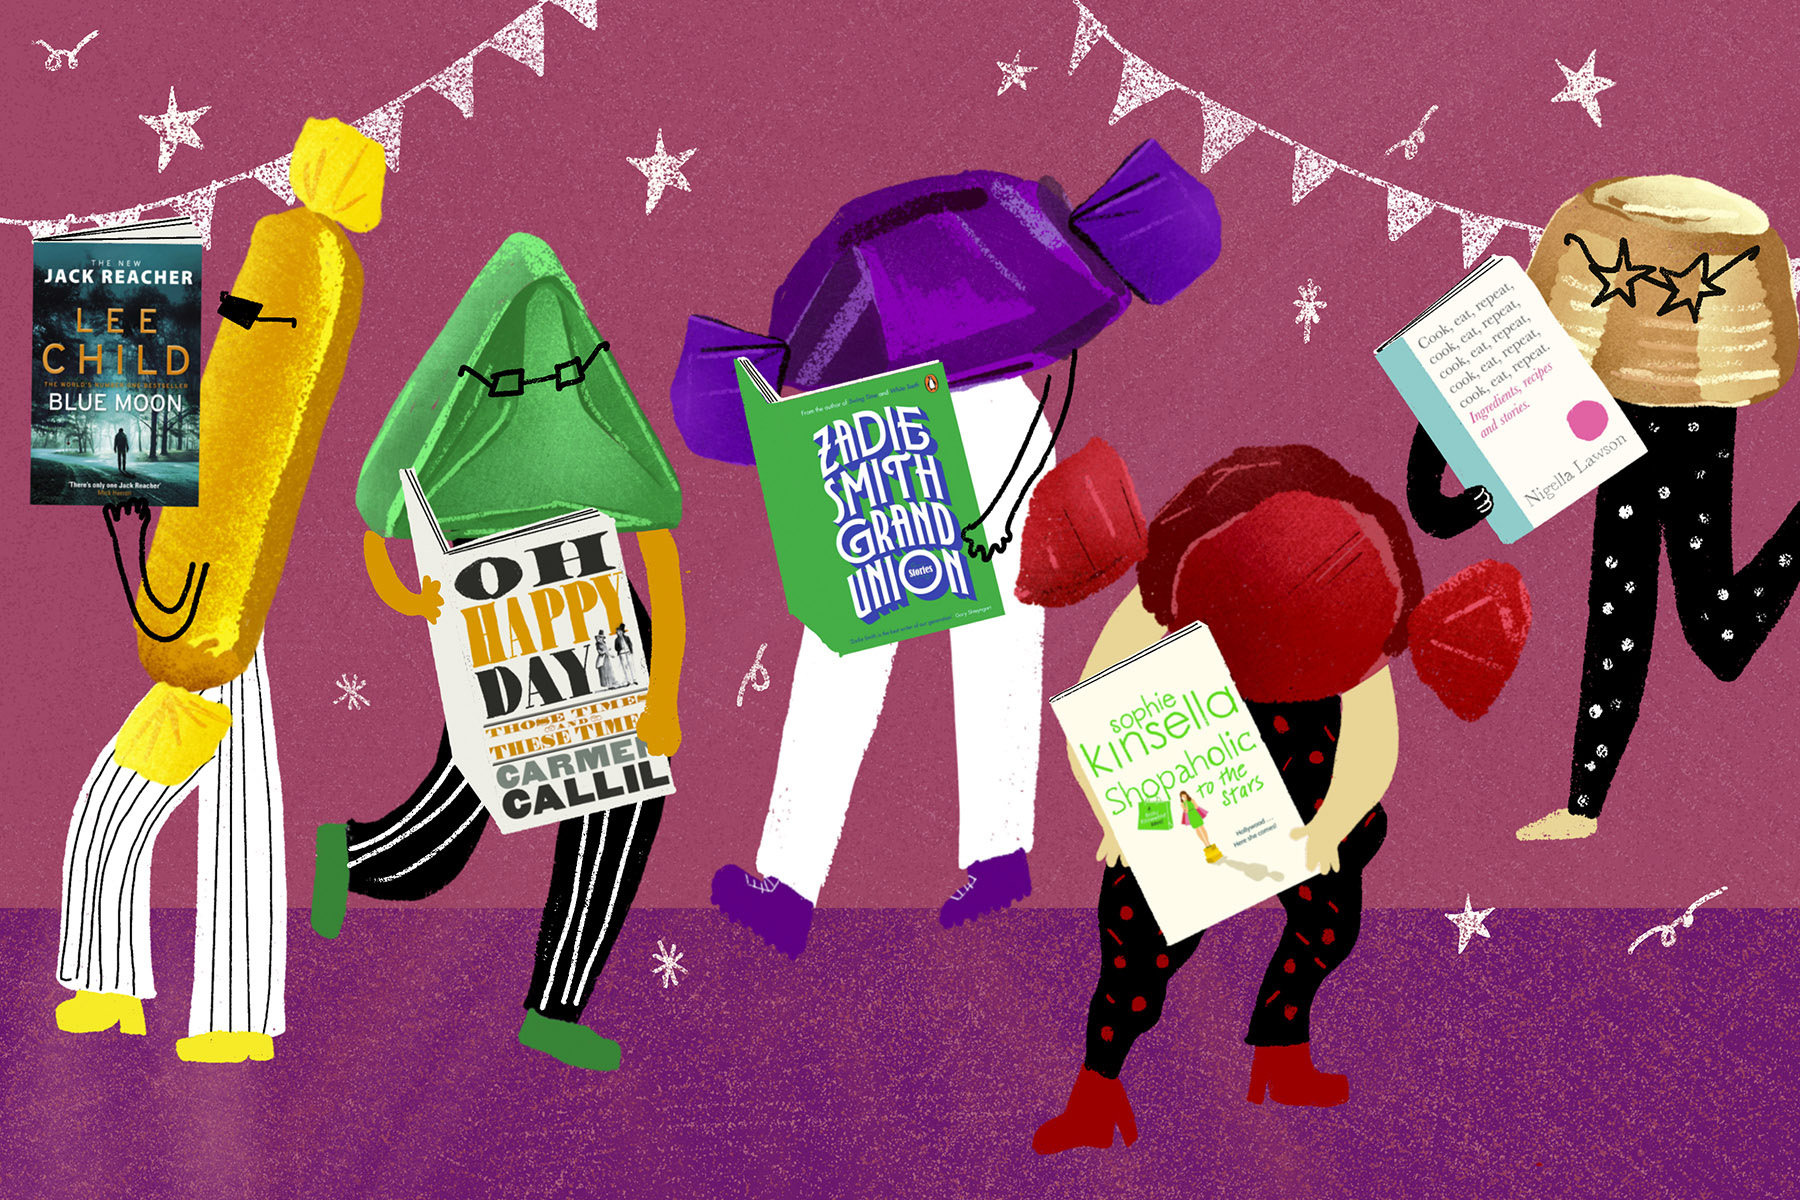 An illustration showing five Quality Street sweets - the Toffee Finger, the Green Triangle, The Purple One, a Strawberry Creme and the Caramel Swirl, as "people" reading books. Image: Alicia Fernandes/Penguin